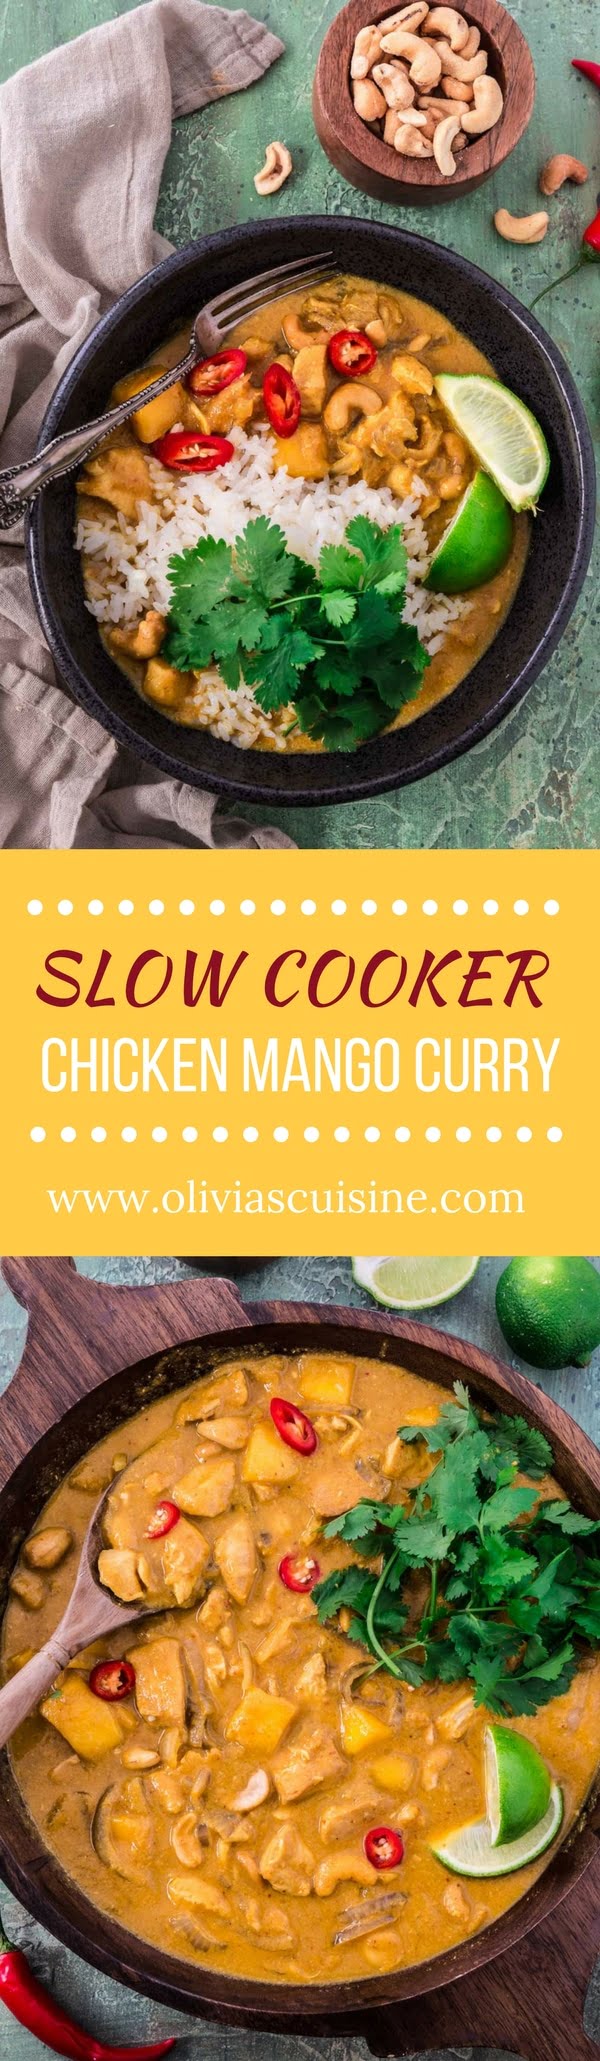 Slow Cooker Chicken Mango Curry | www.oliviascuisine.com | Warm up your body and soul with a bowl of this delicious Slow Cooker Chicken Mango Curry. With just 5 minutes of prep, it will bring happiness to those busy winter days! (Recipe and food photography by @oliviascuisine.)